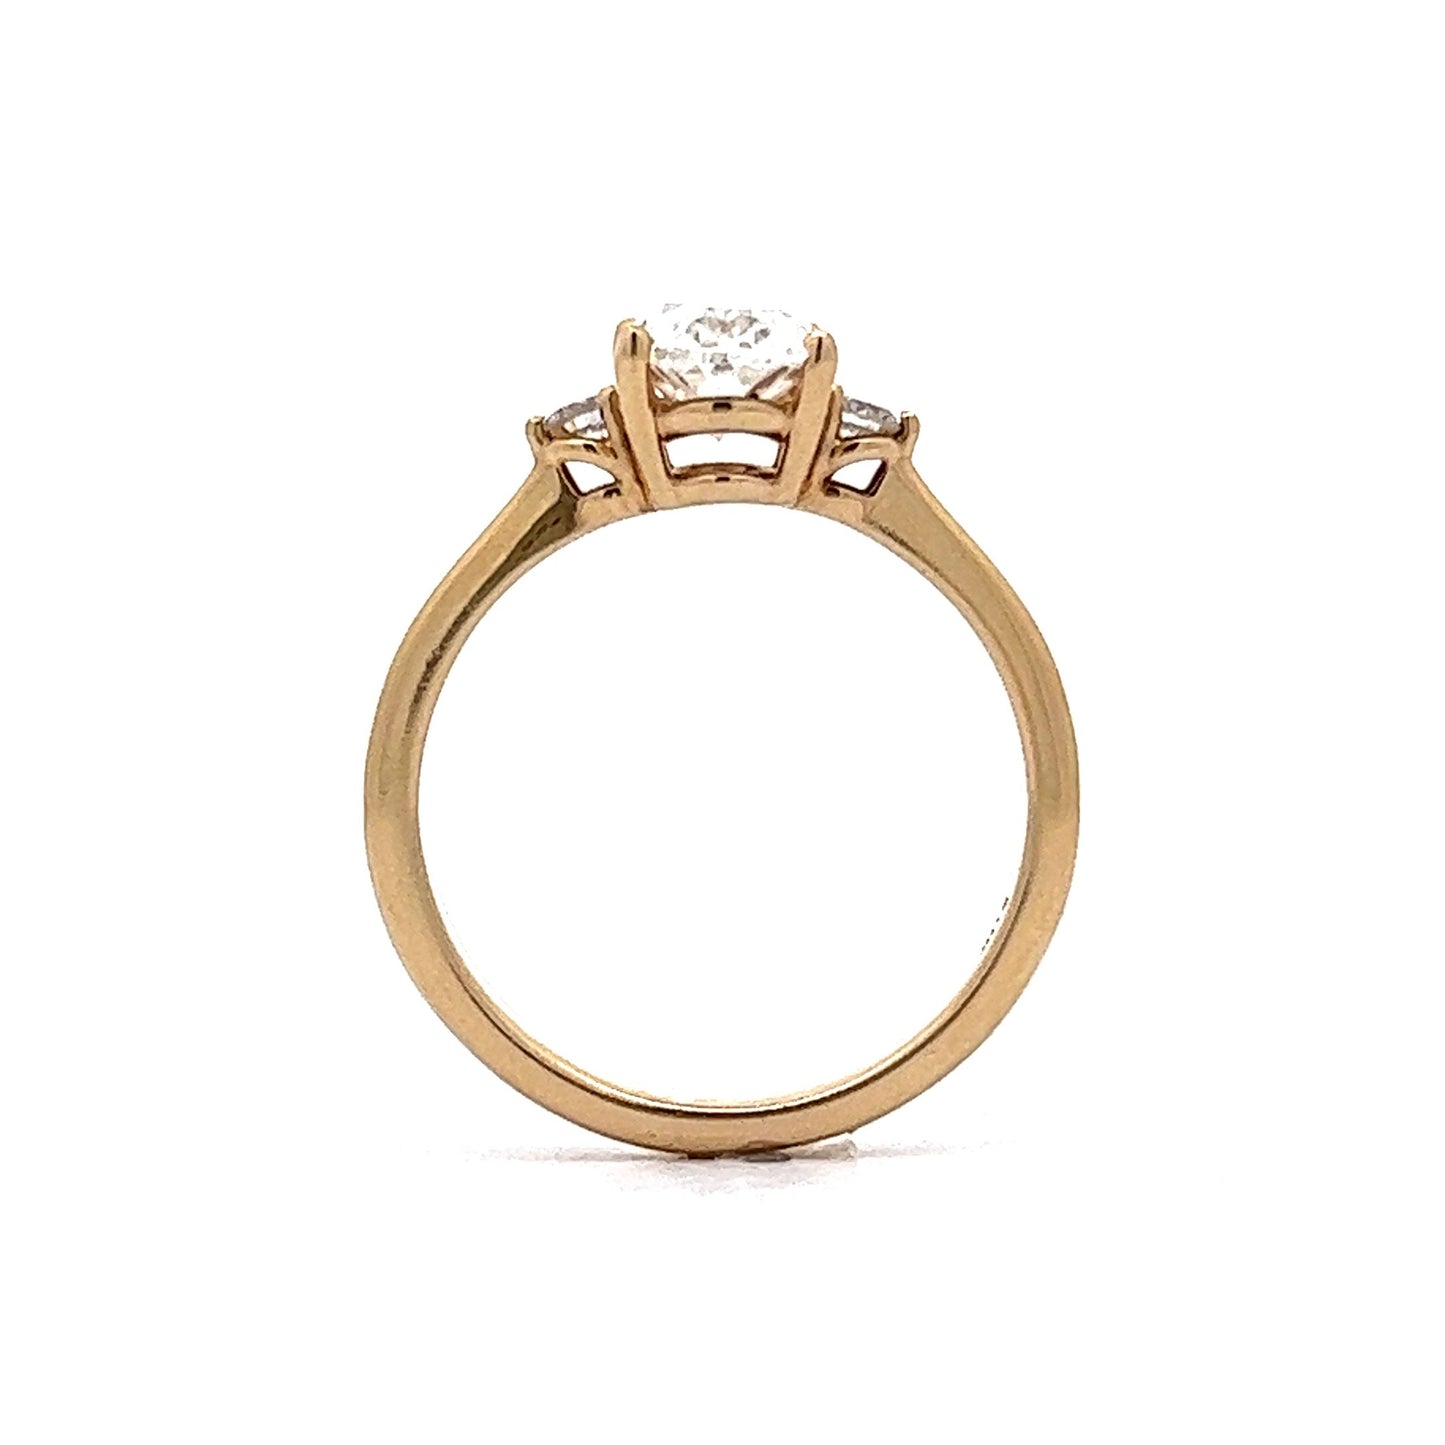 1.50 GIA Oval Cut Diamond Engagement Ring in 14k Yellow Gold